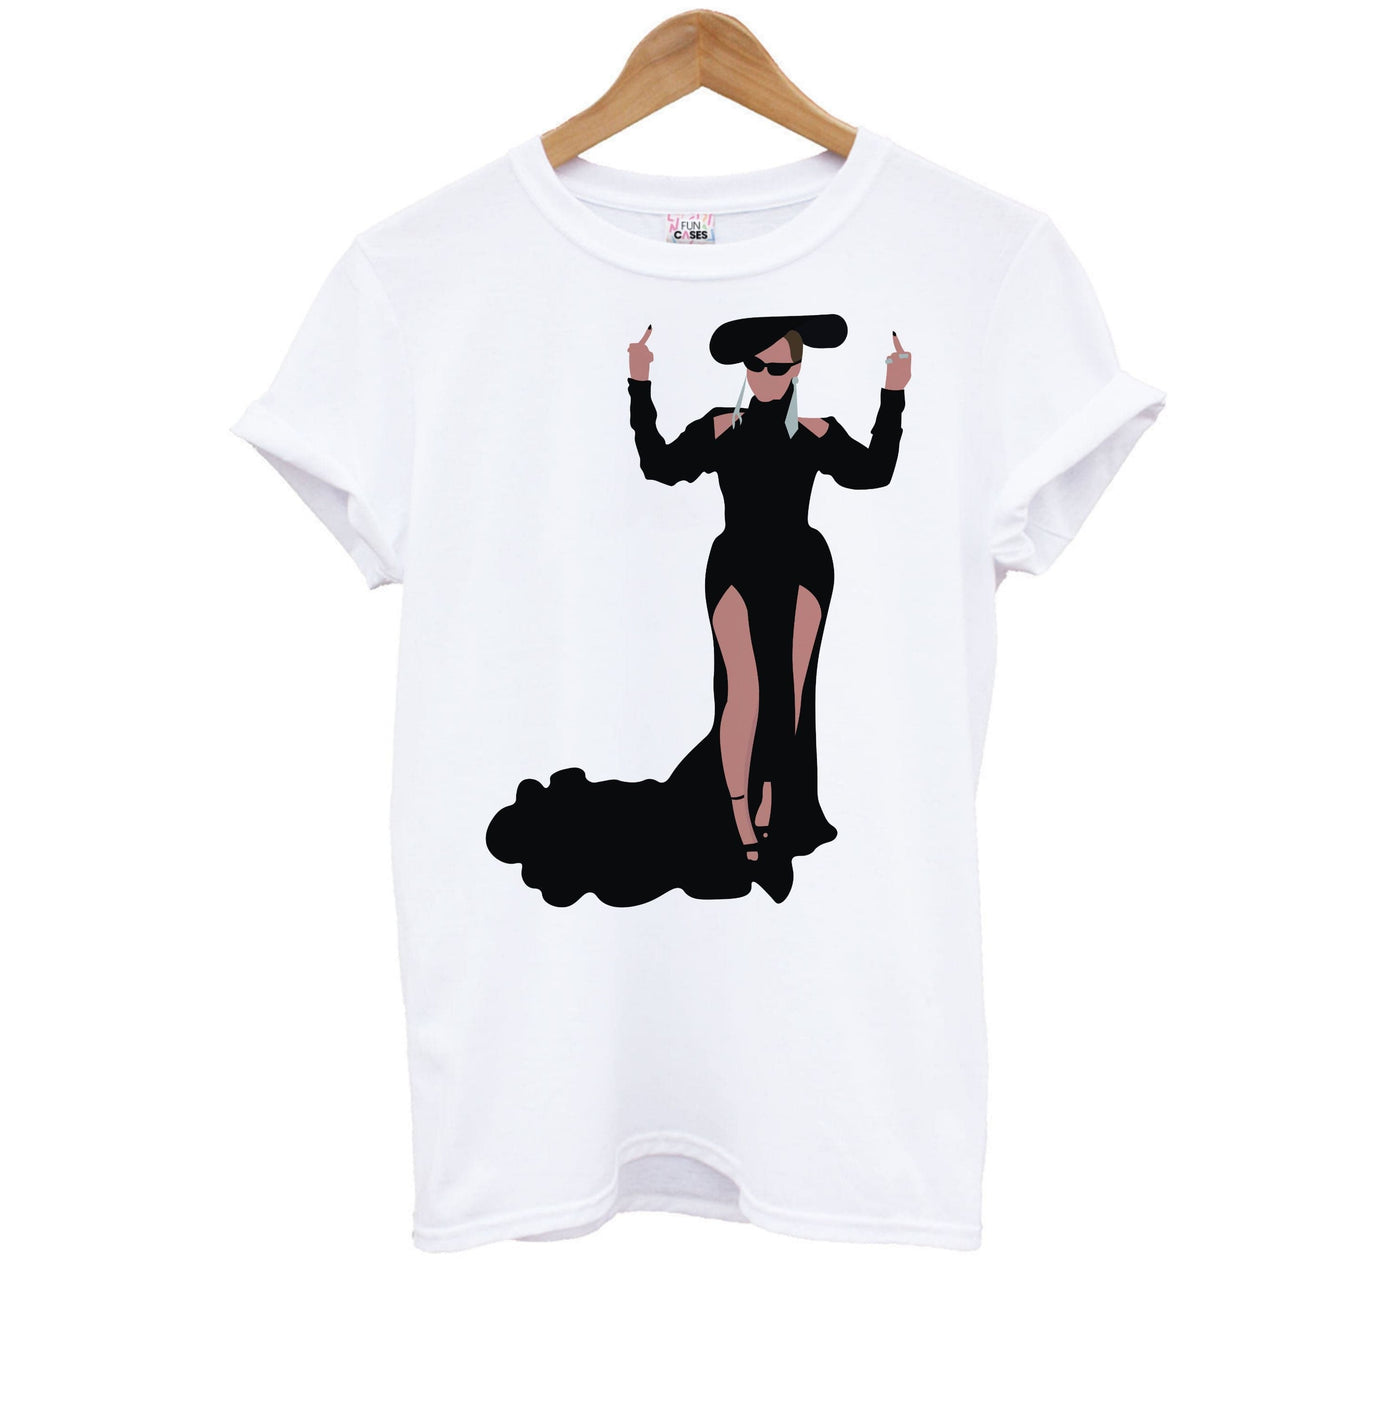 Middle Fingers - Beyonce Kids T-Shirt